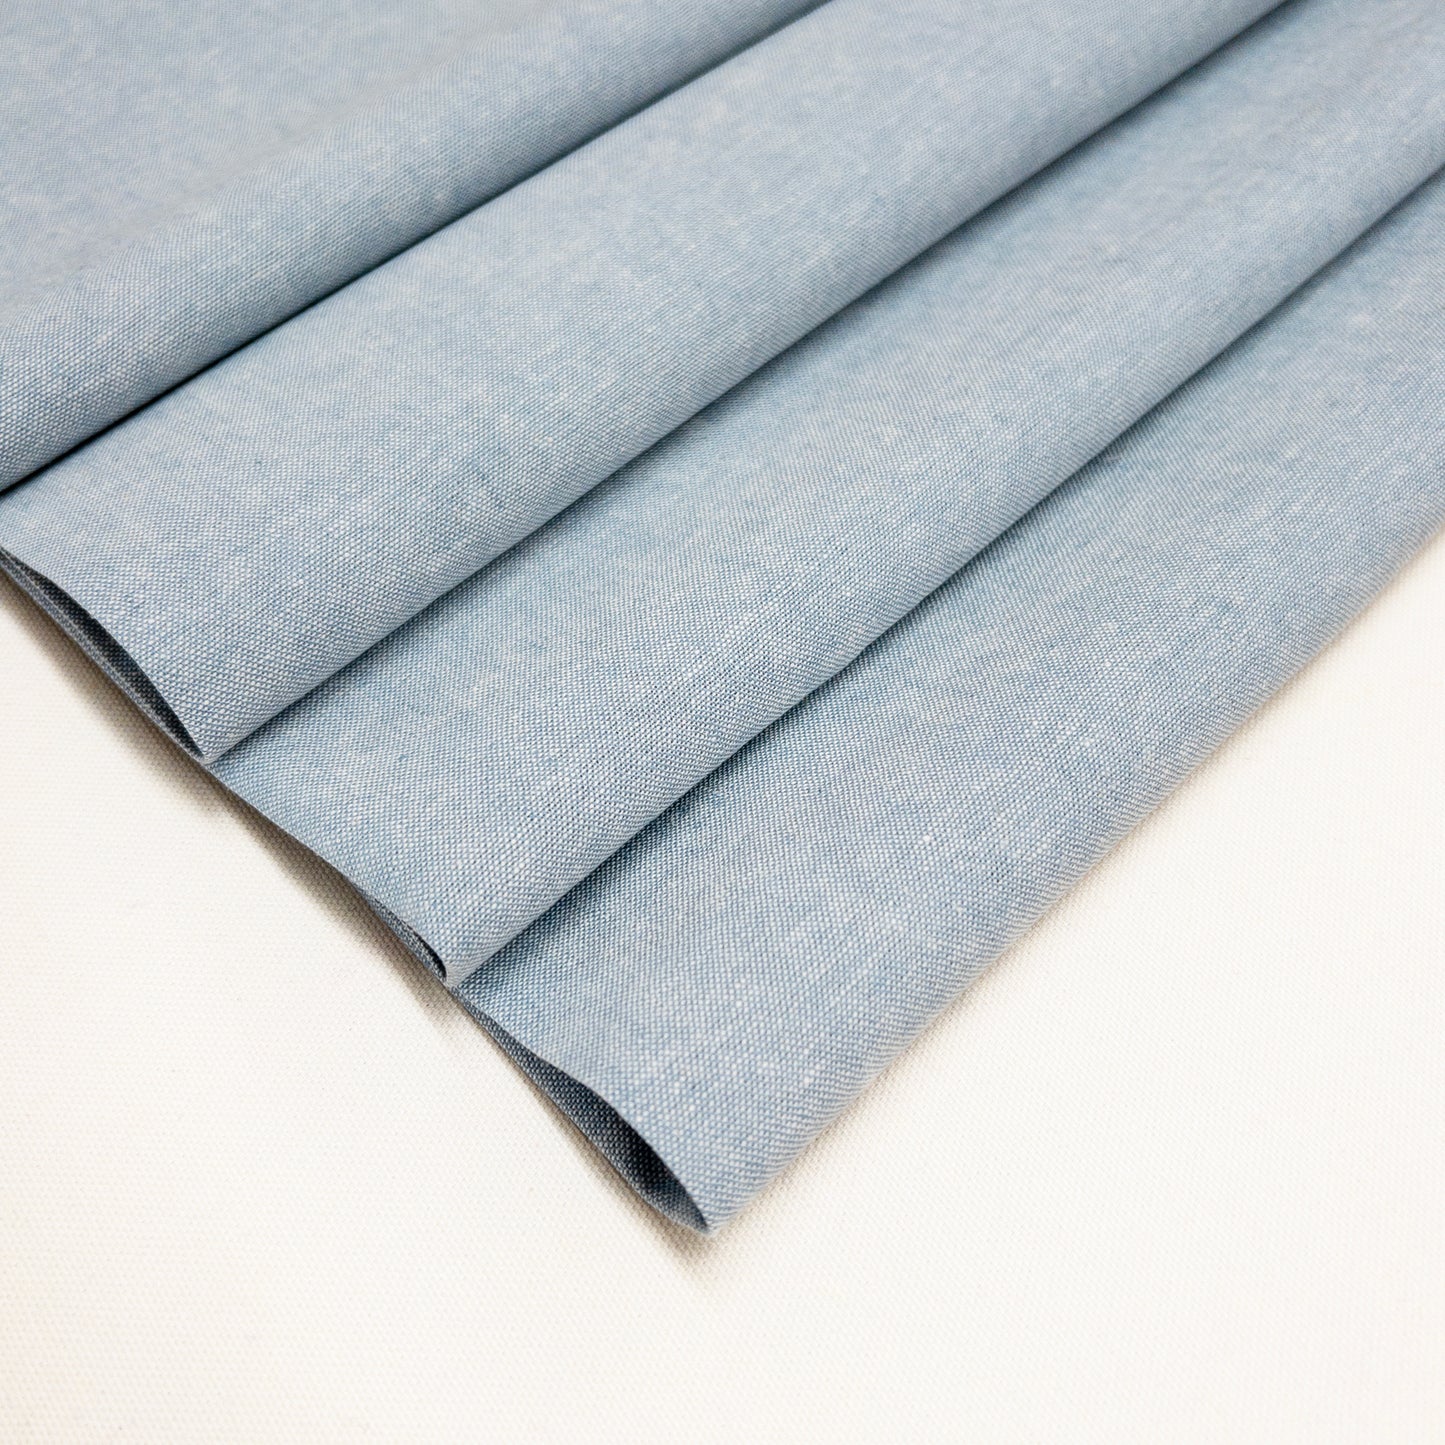 Essex Cotton Linen Blend in Chambray